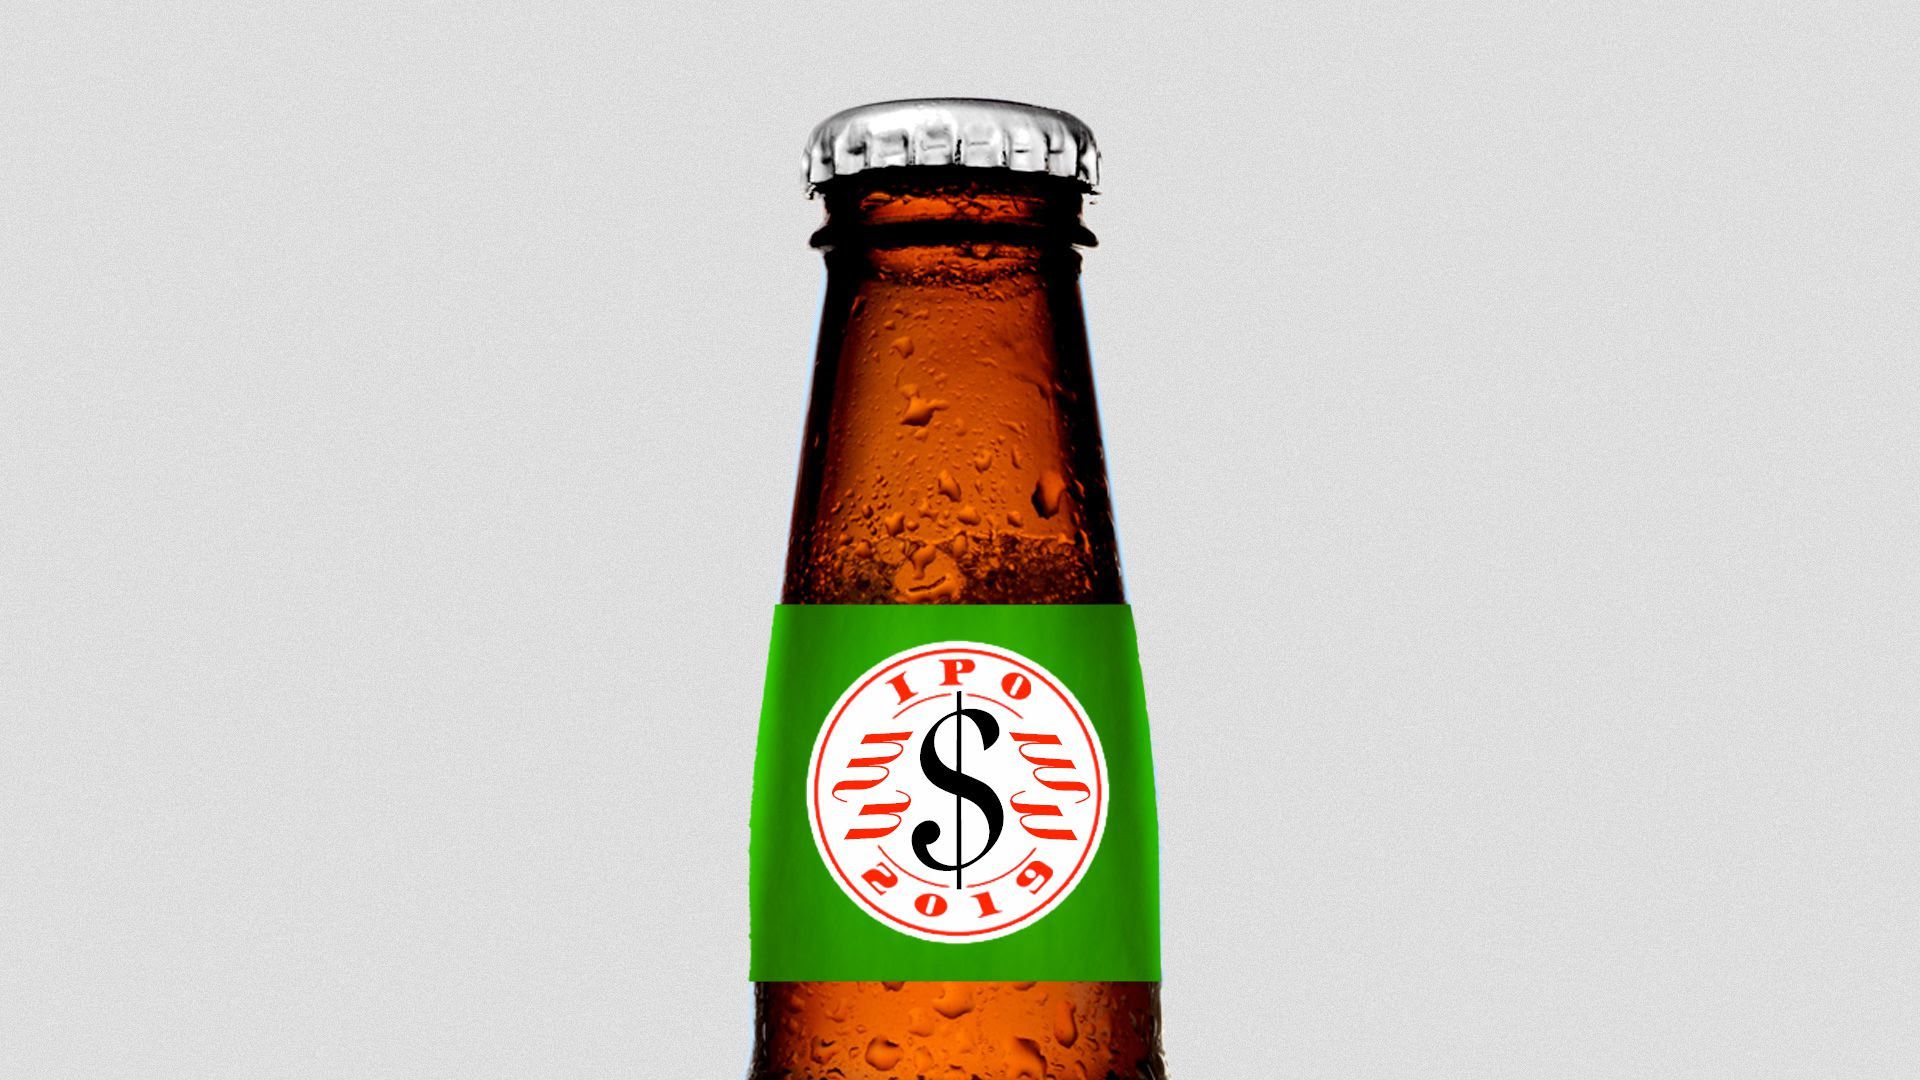 A mock bottle of an IPA beer with the logo reading IPO instead.